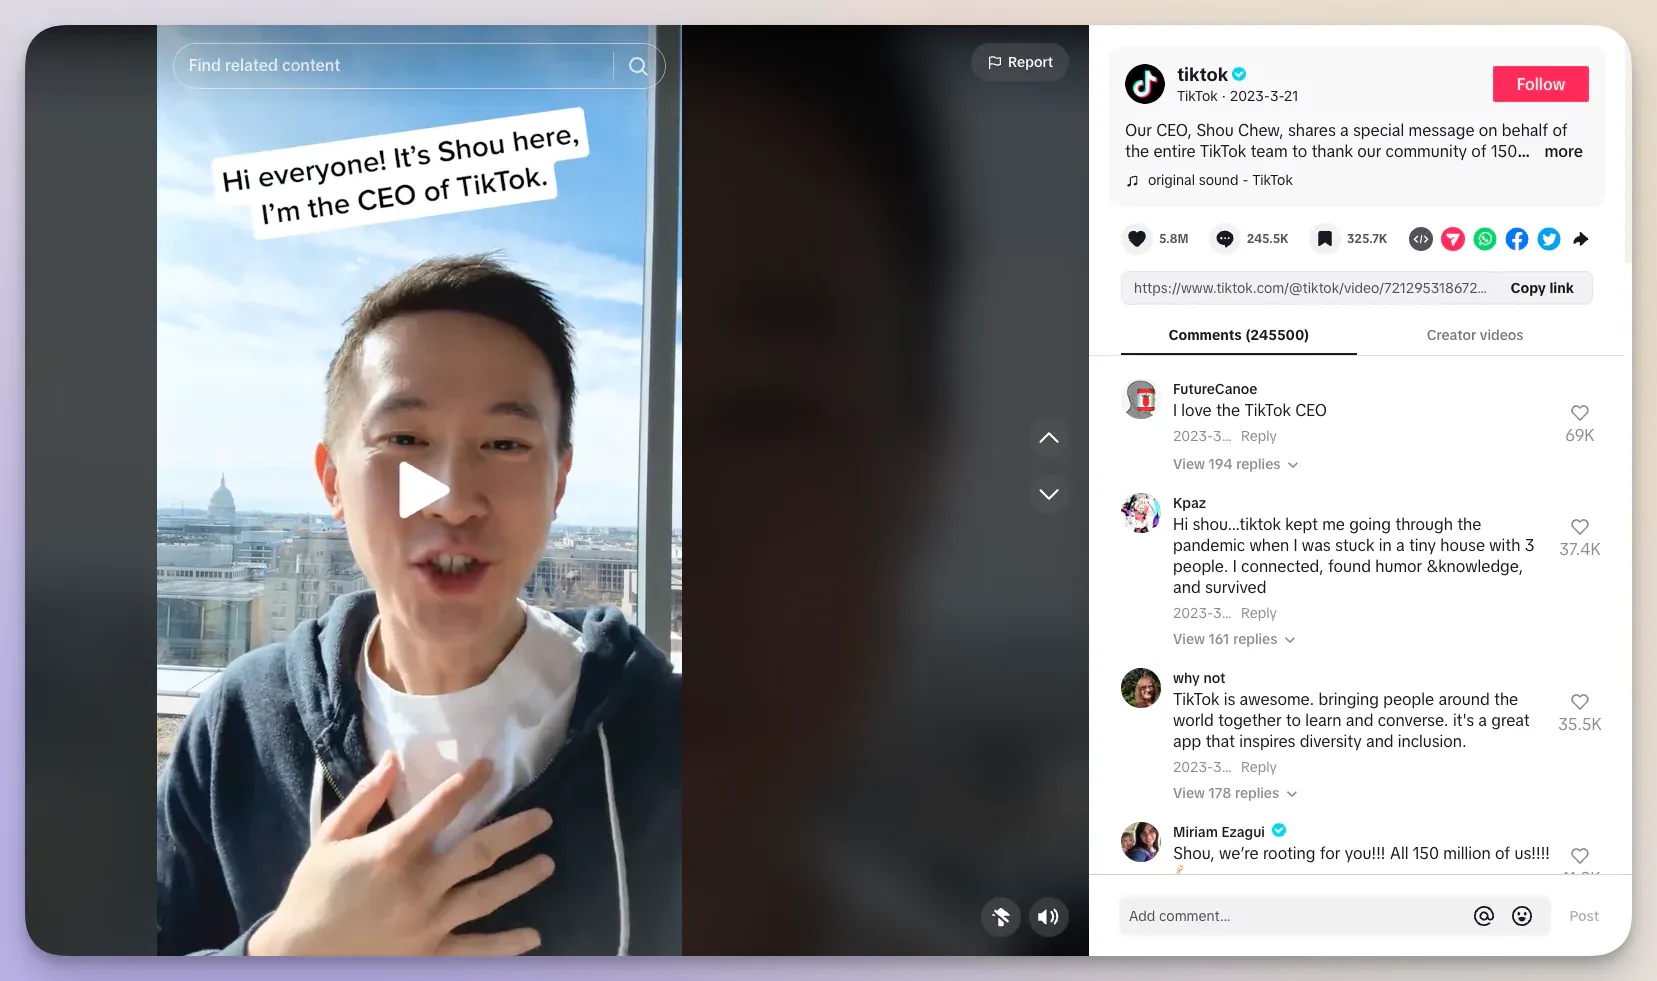 Here's how TikTok's CEO shares special messages about the challenges they face